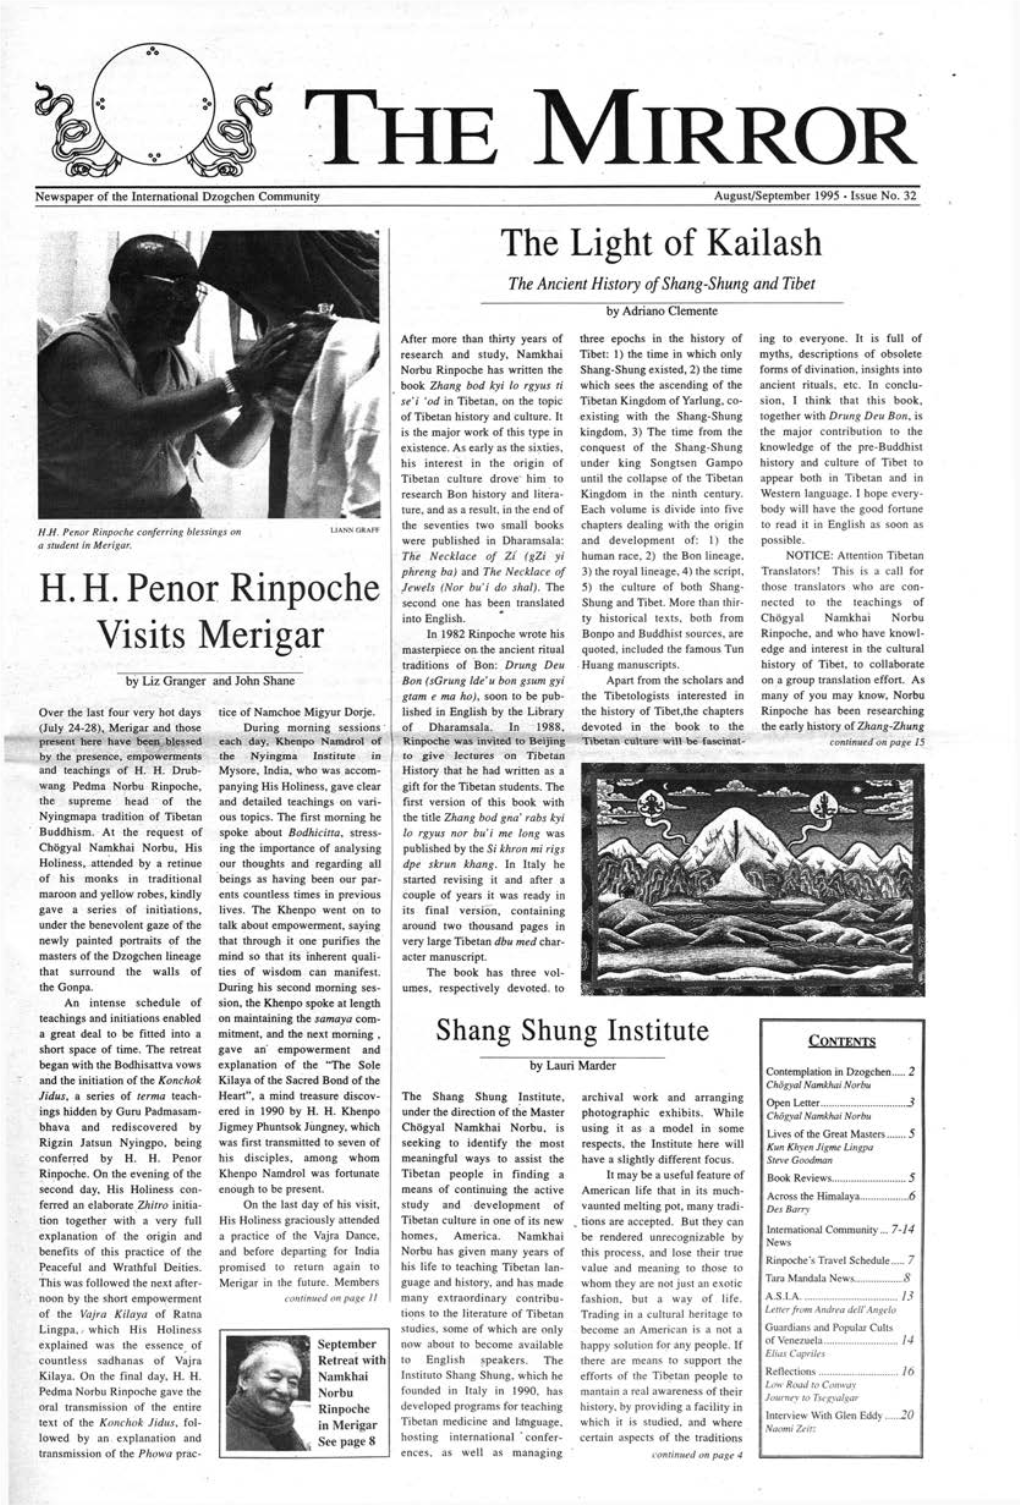 H.H. Penor Rinpoche Visits Merigar the Light of Kailash